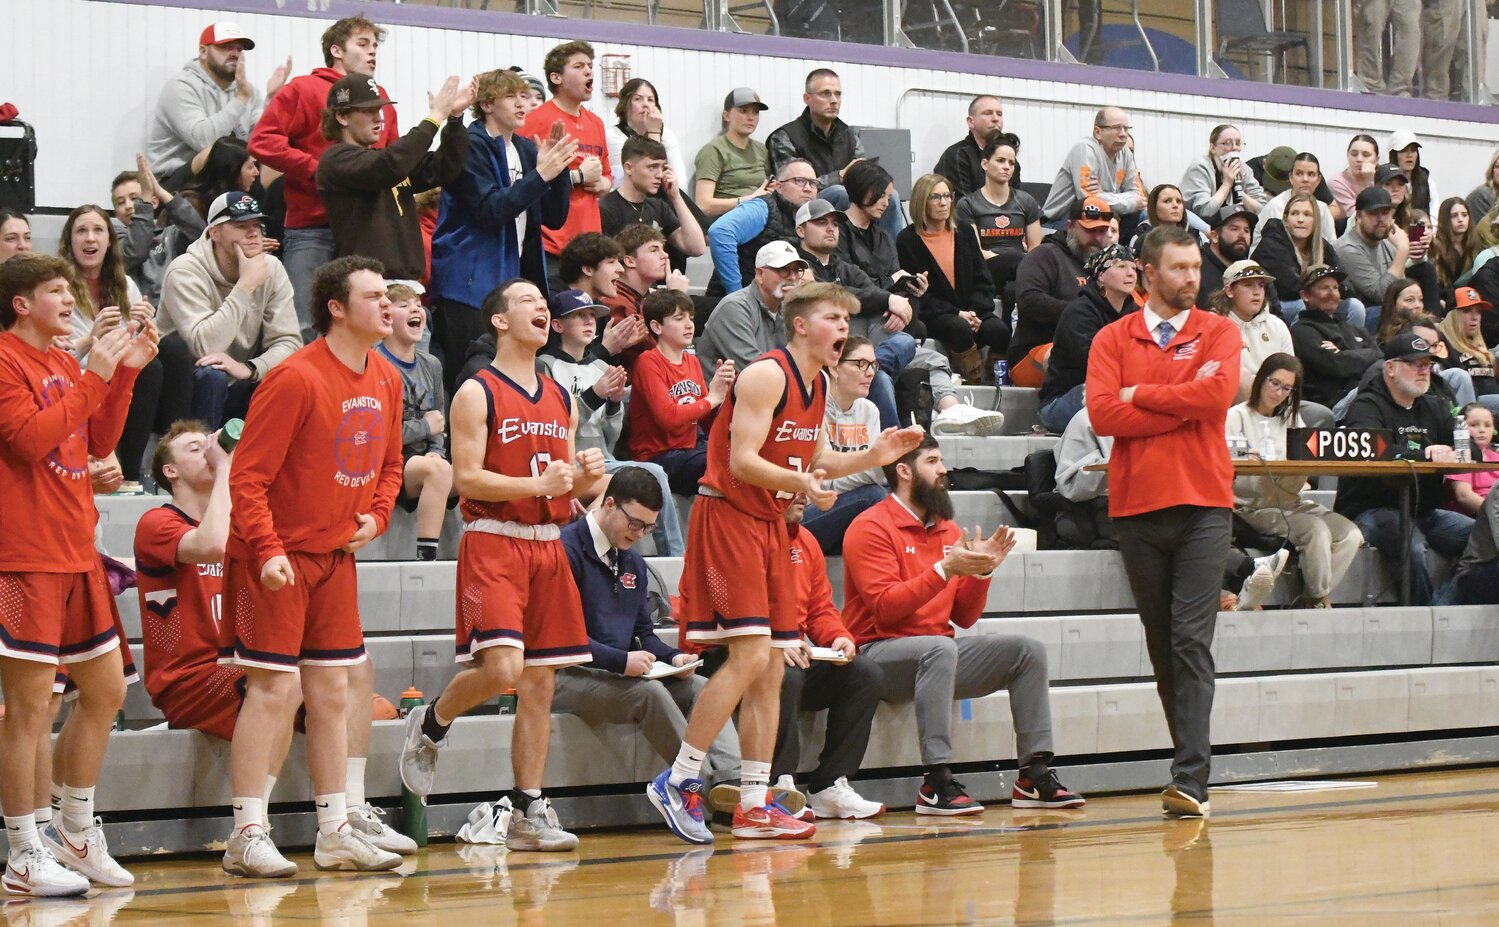 The Red Devils bench celebrates, while Rock Springs fans look on in dismay, as Evanston beat the Tigers 49-41 Saturday to advance to the 4A State Basketball Tournament this weekend in Casper. It’s the first trip to State for the program in the Rob Watsabaugh era.